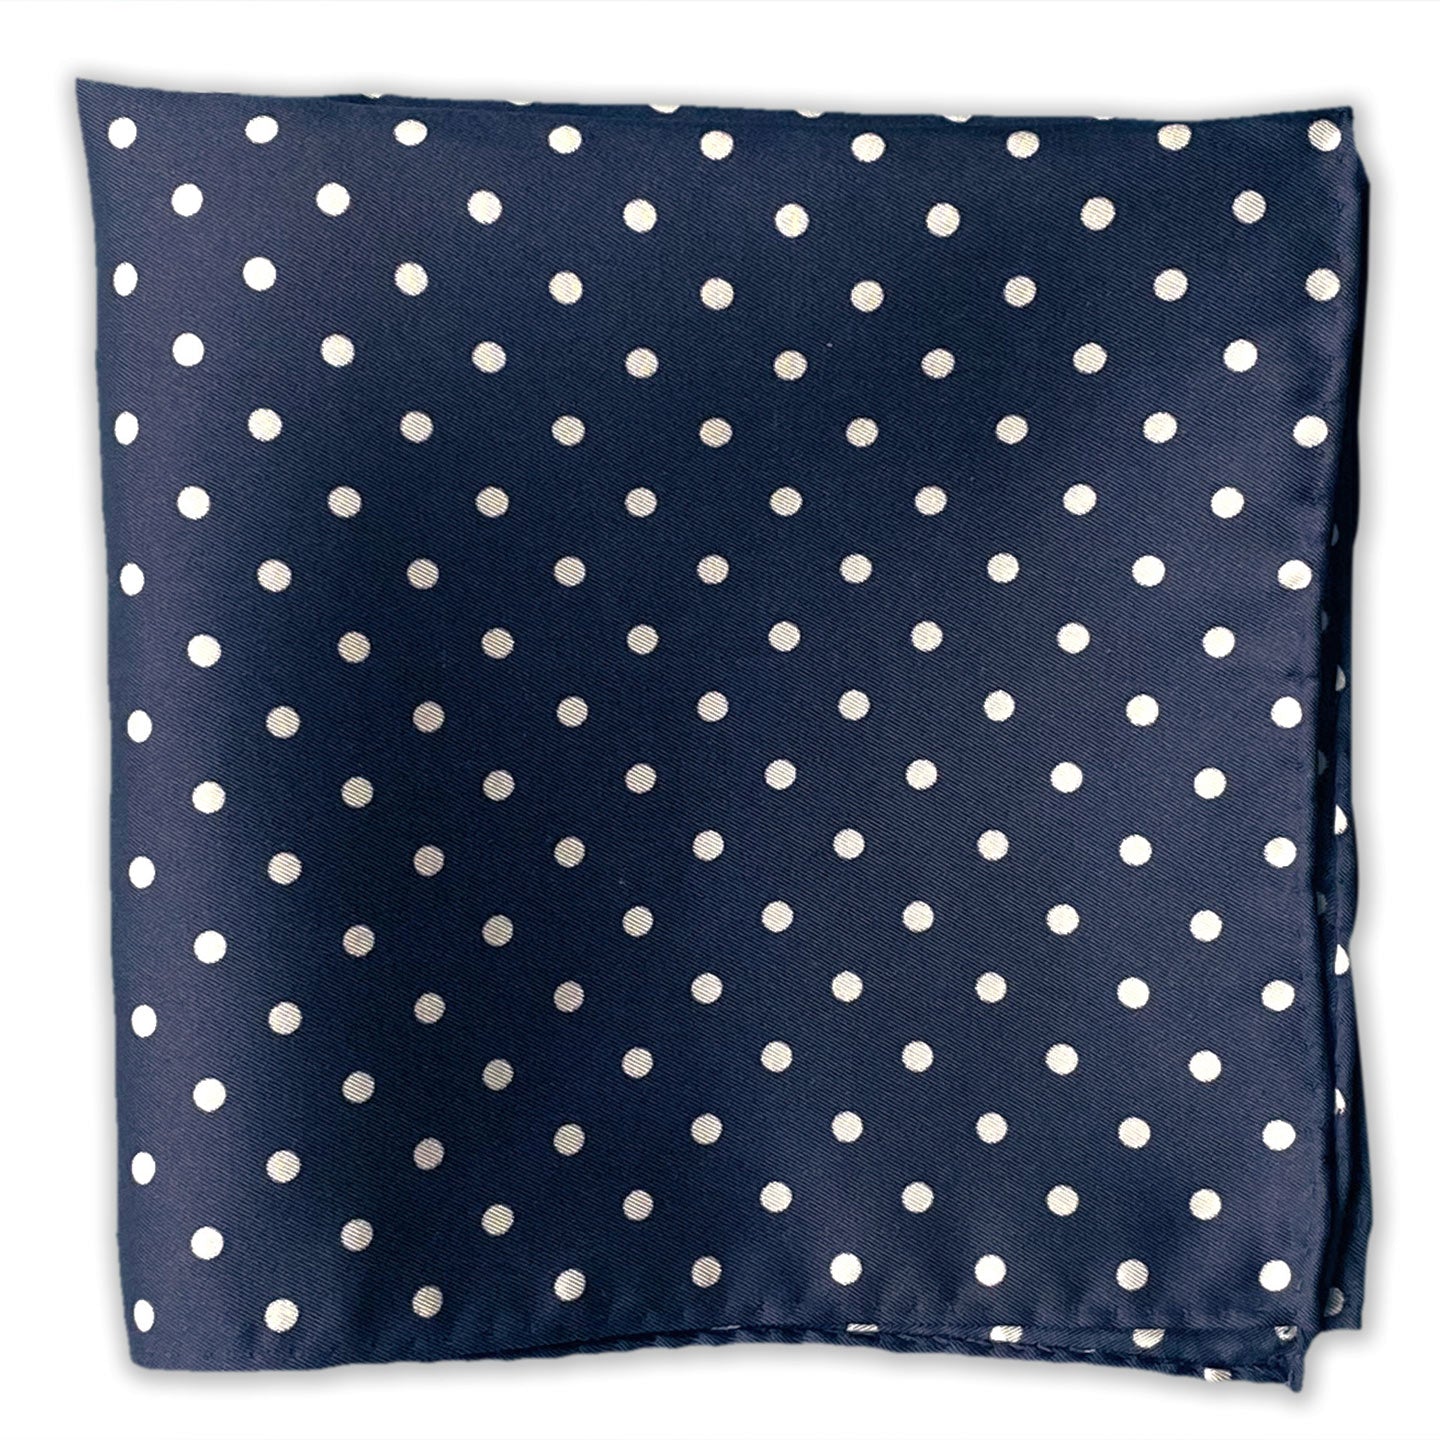 Flat view of the 'Westminster' polka dot patterned silk pocket square set on a deep blue fabric background.